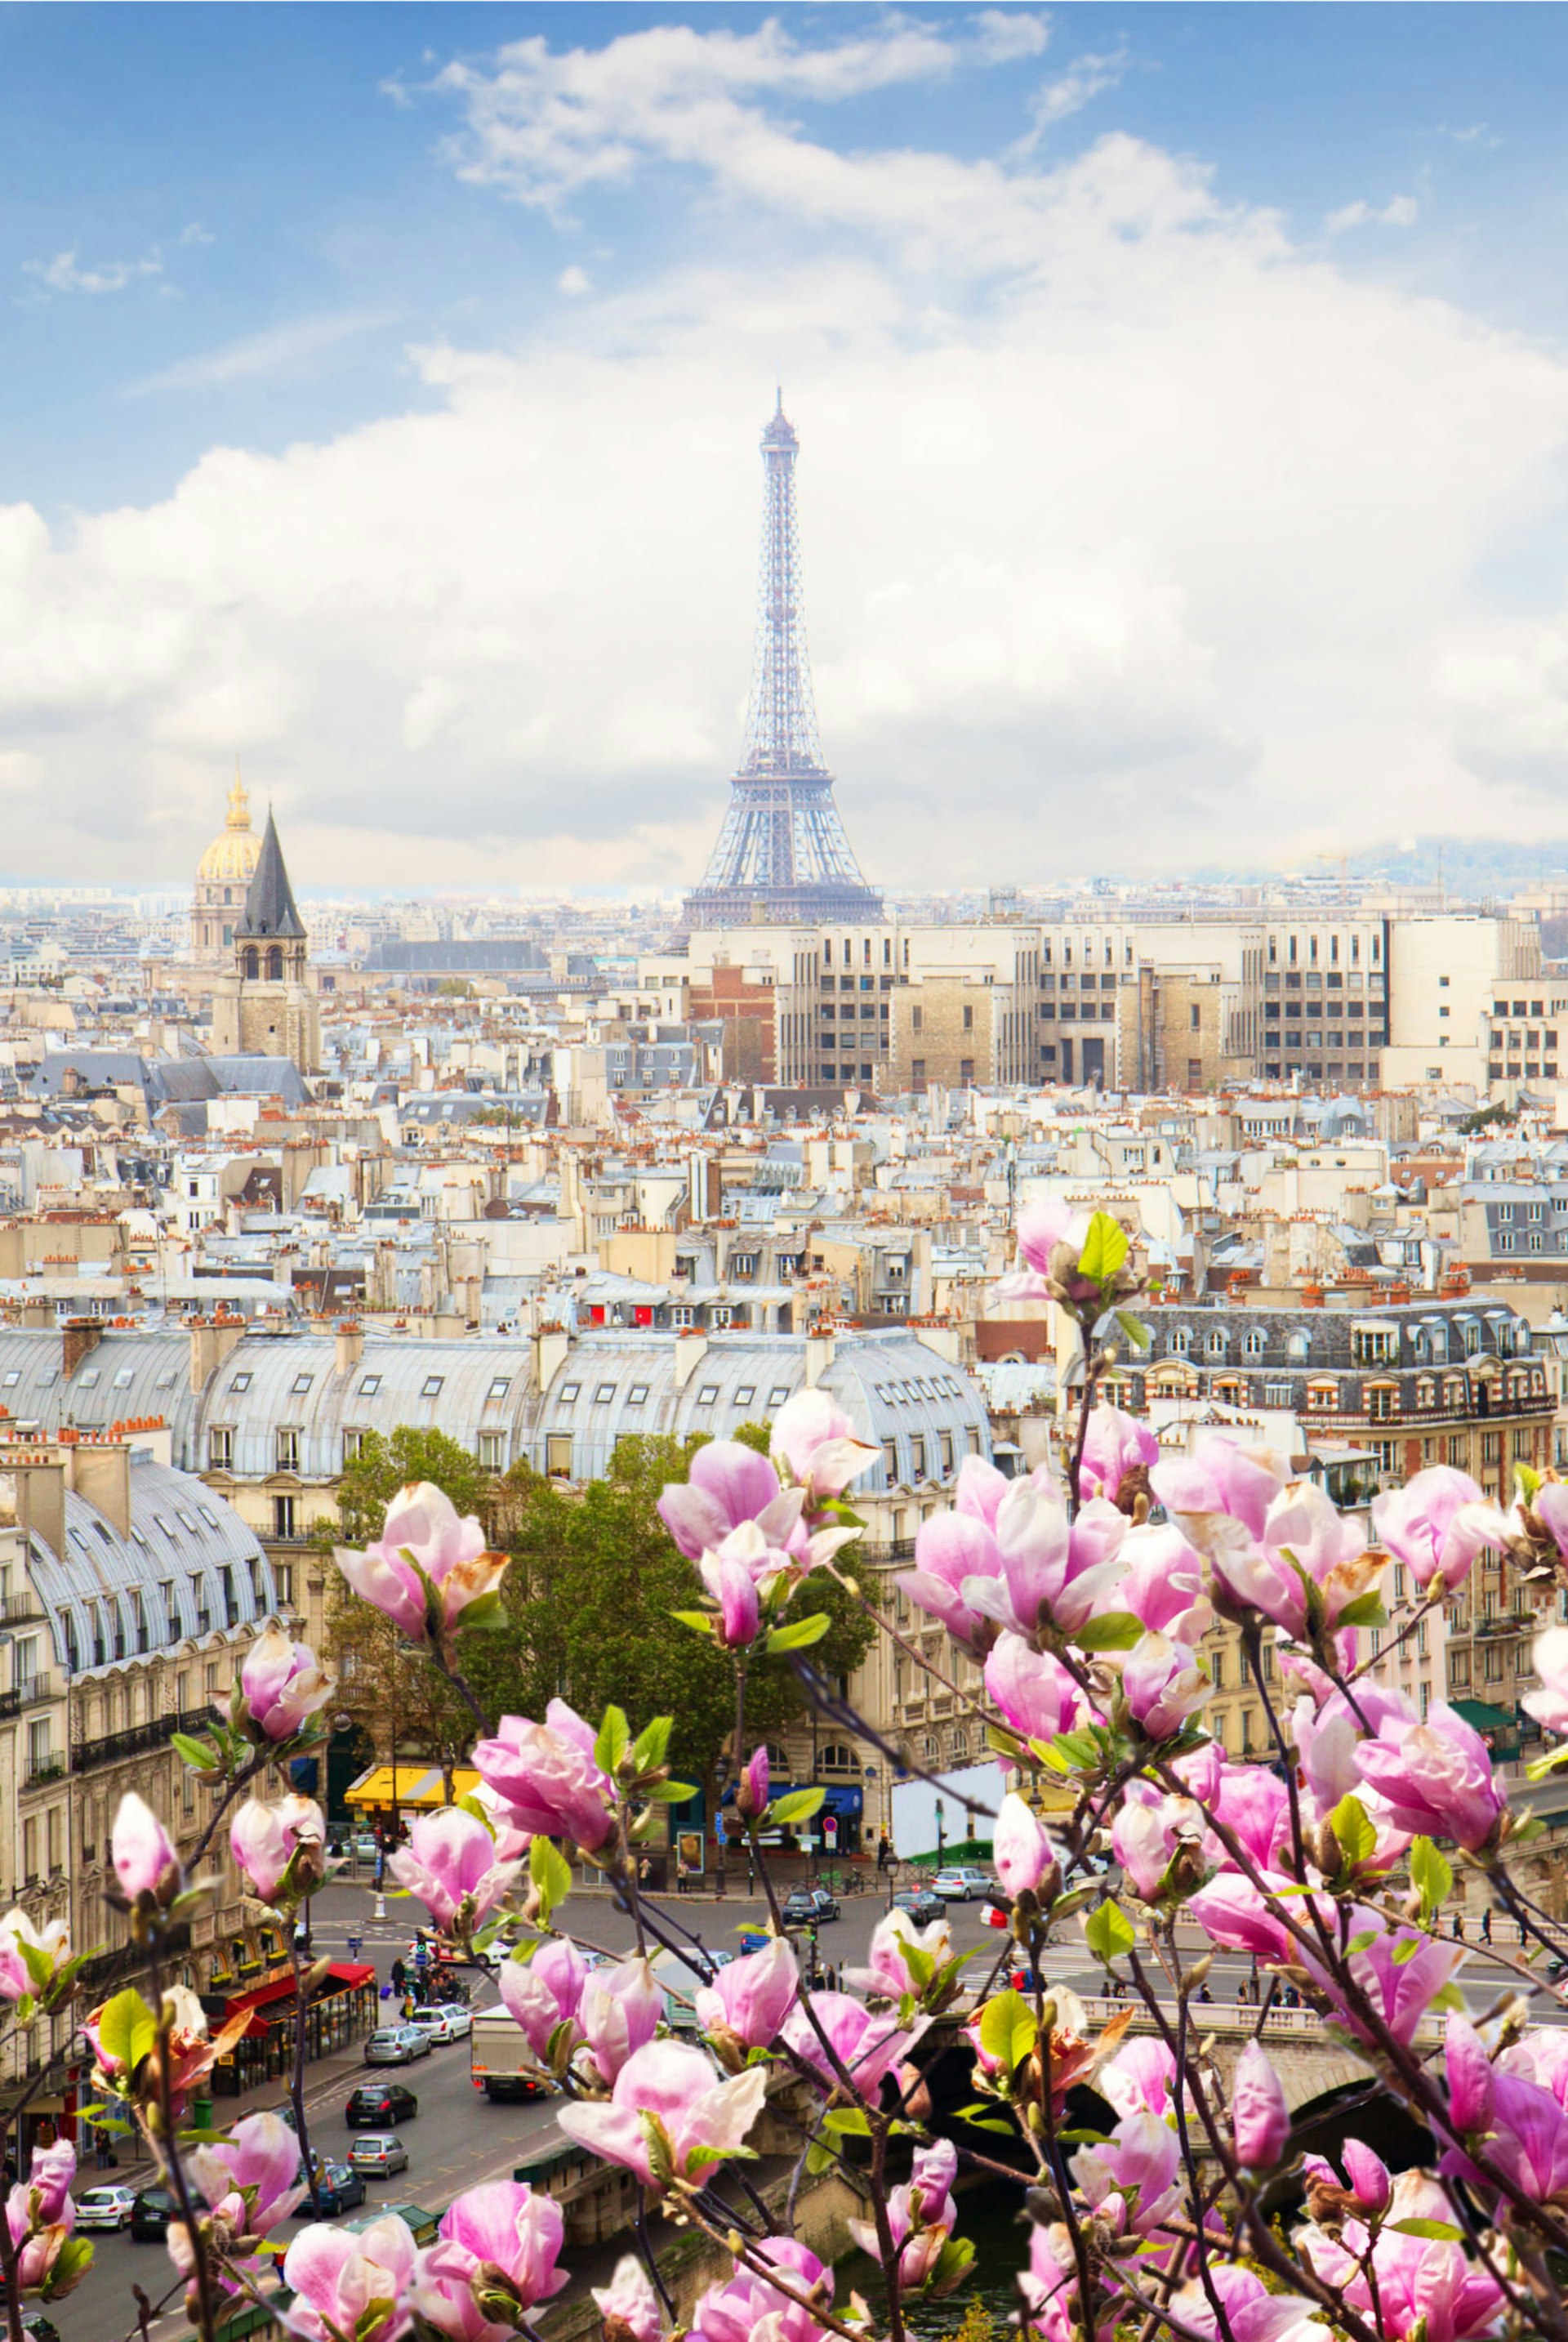 The Paris skyline including the Eiffel Tower through blooming a magnolia tree © Neirfy / Shutterstock